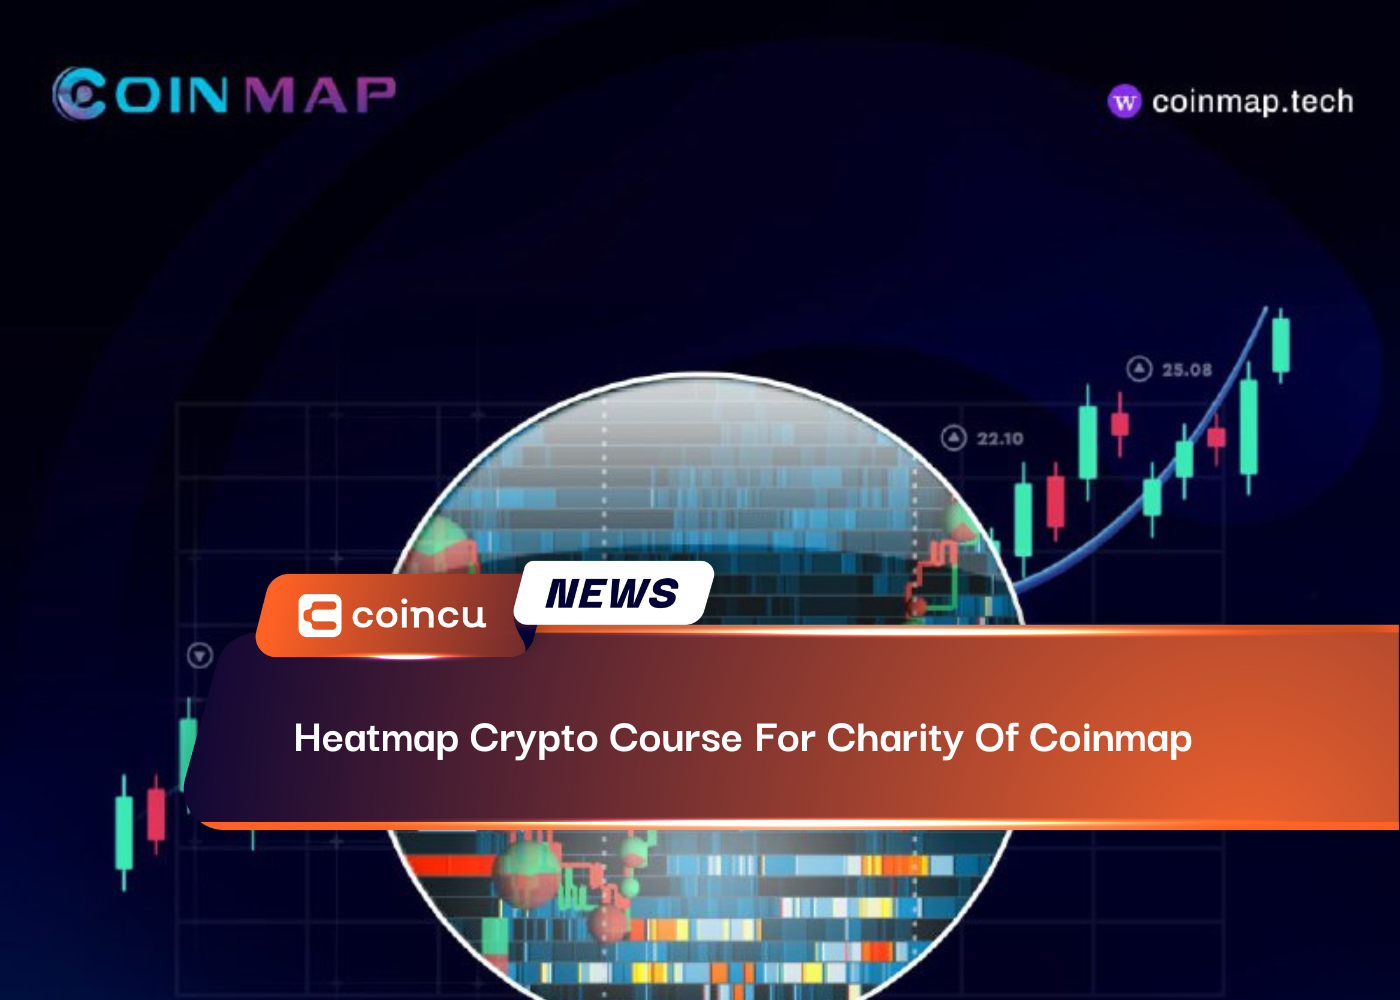 Heatmap Crypto Course For Charity Of Coinmap